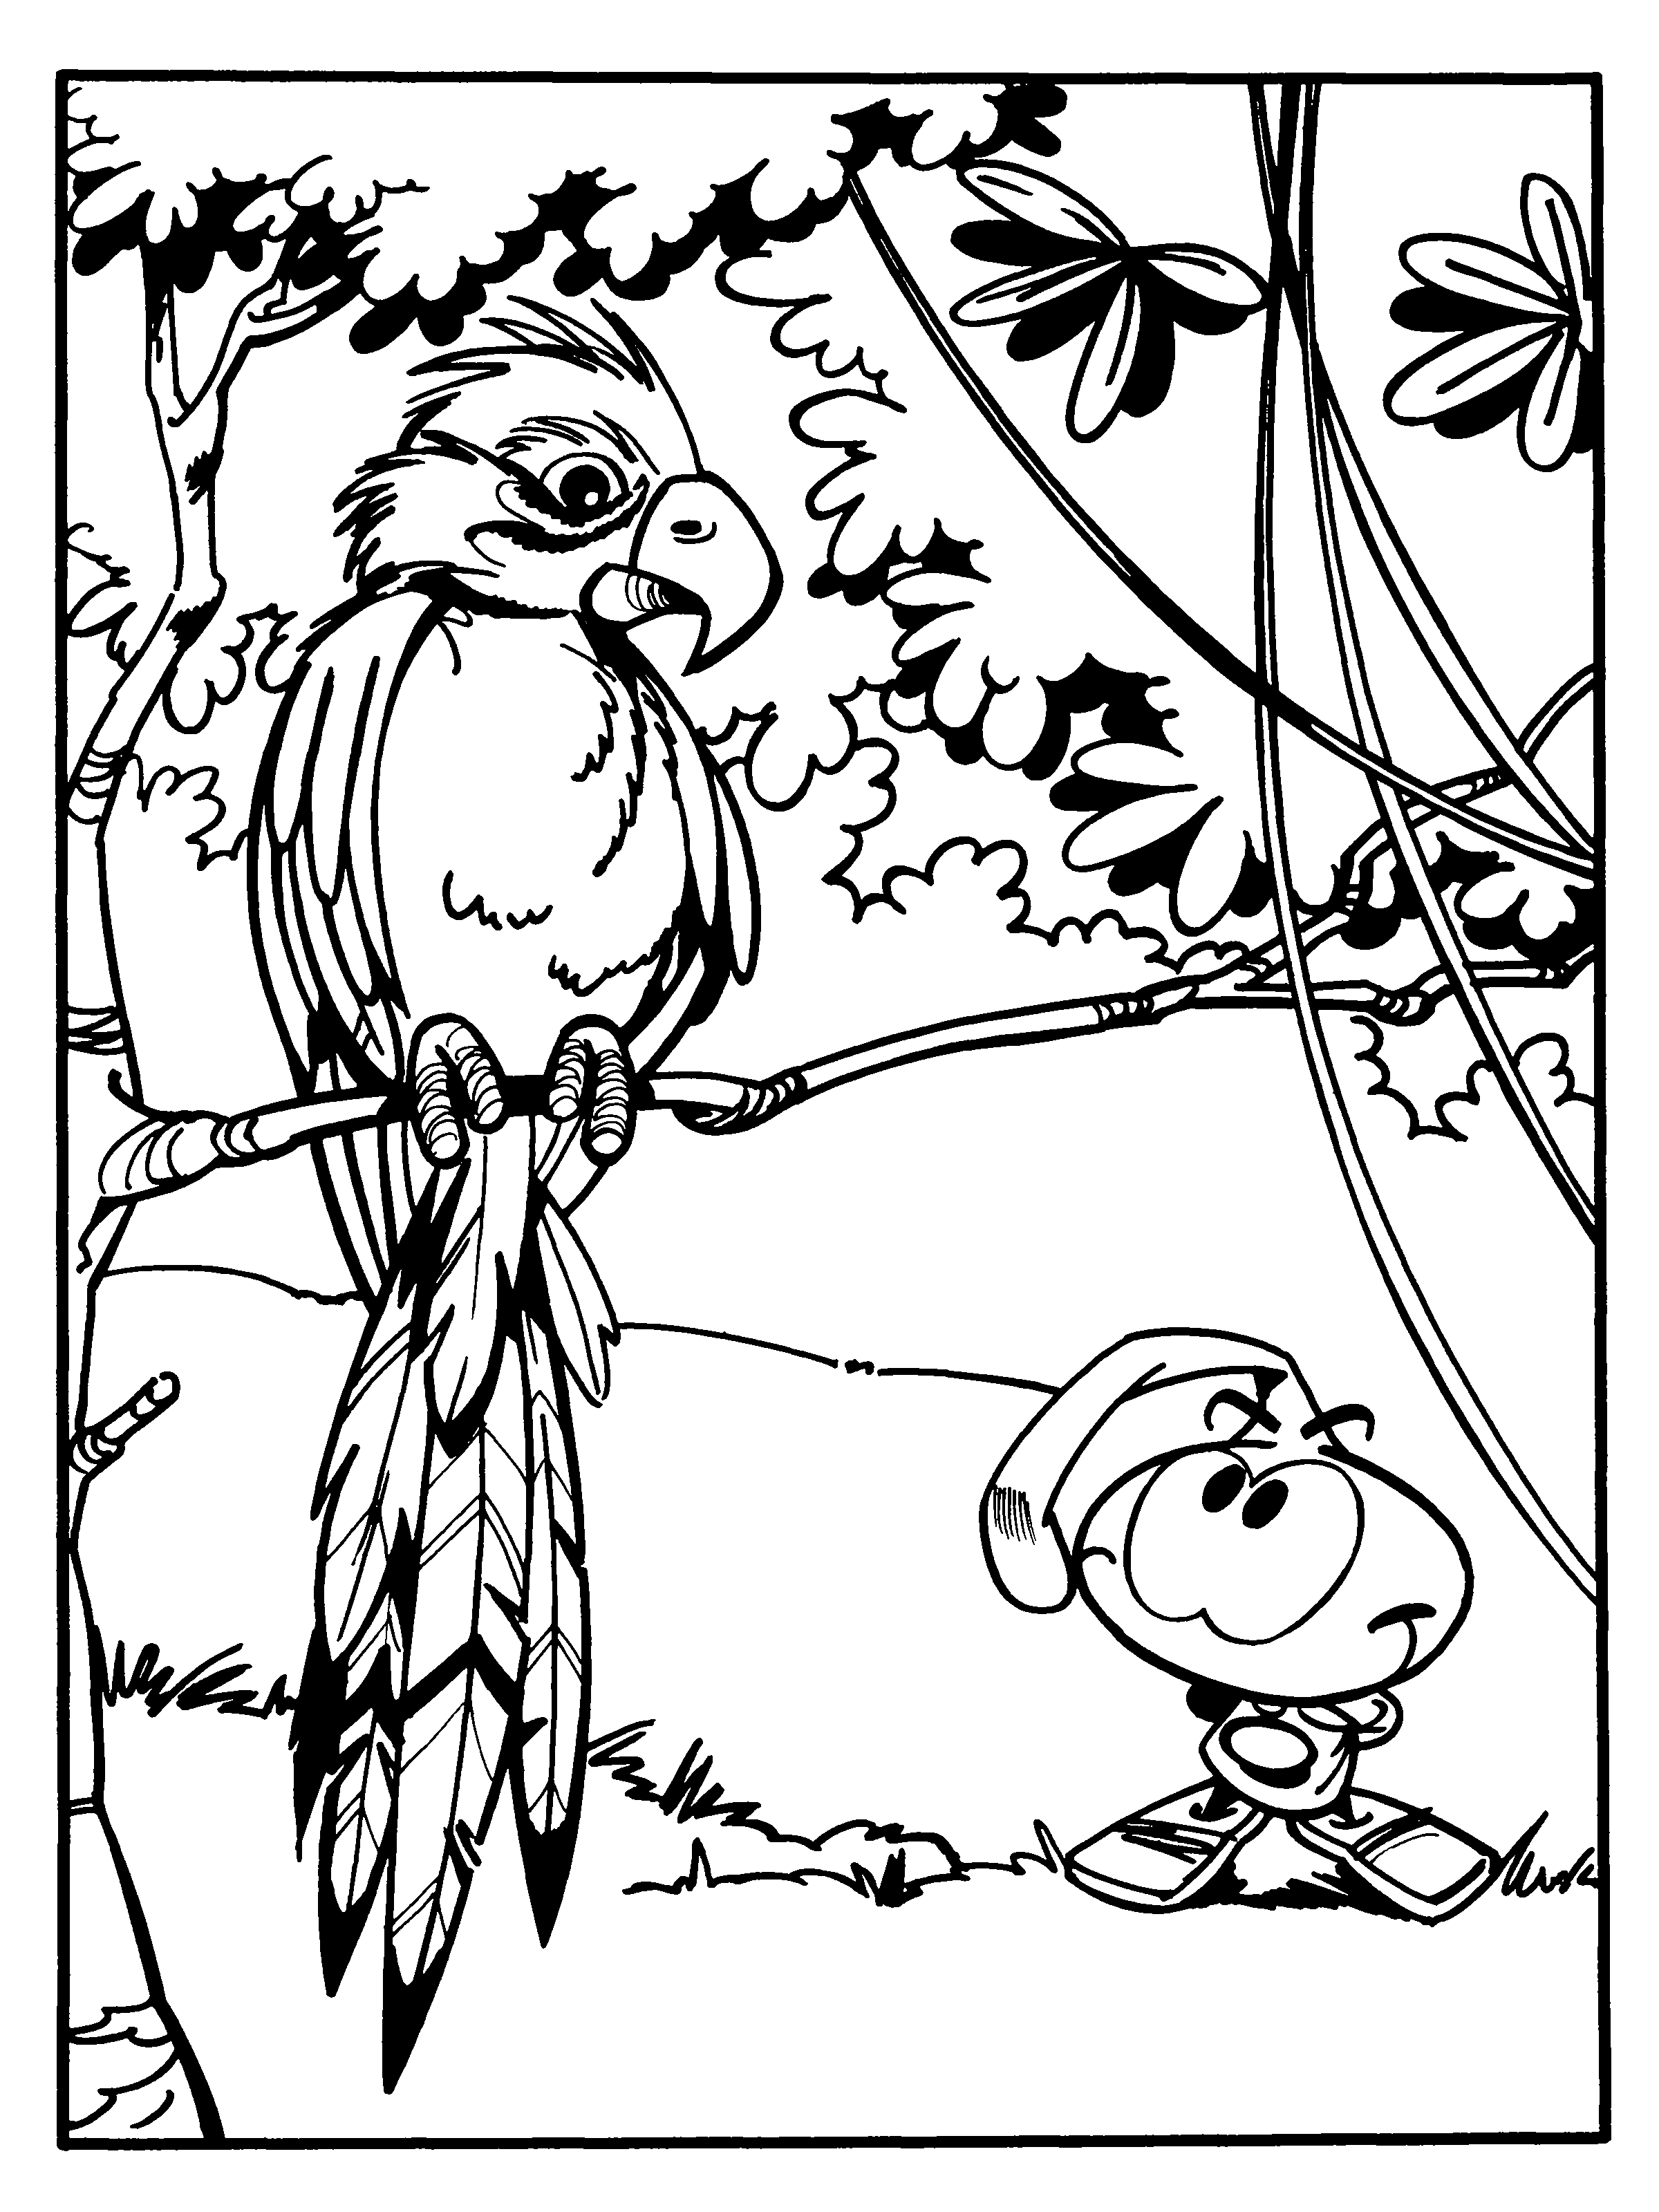 Snorks coloring pages